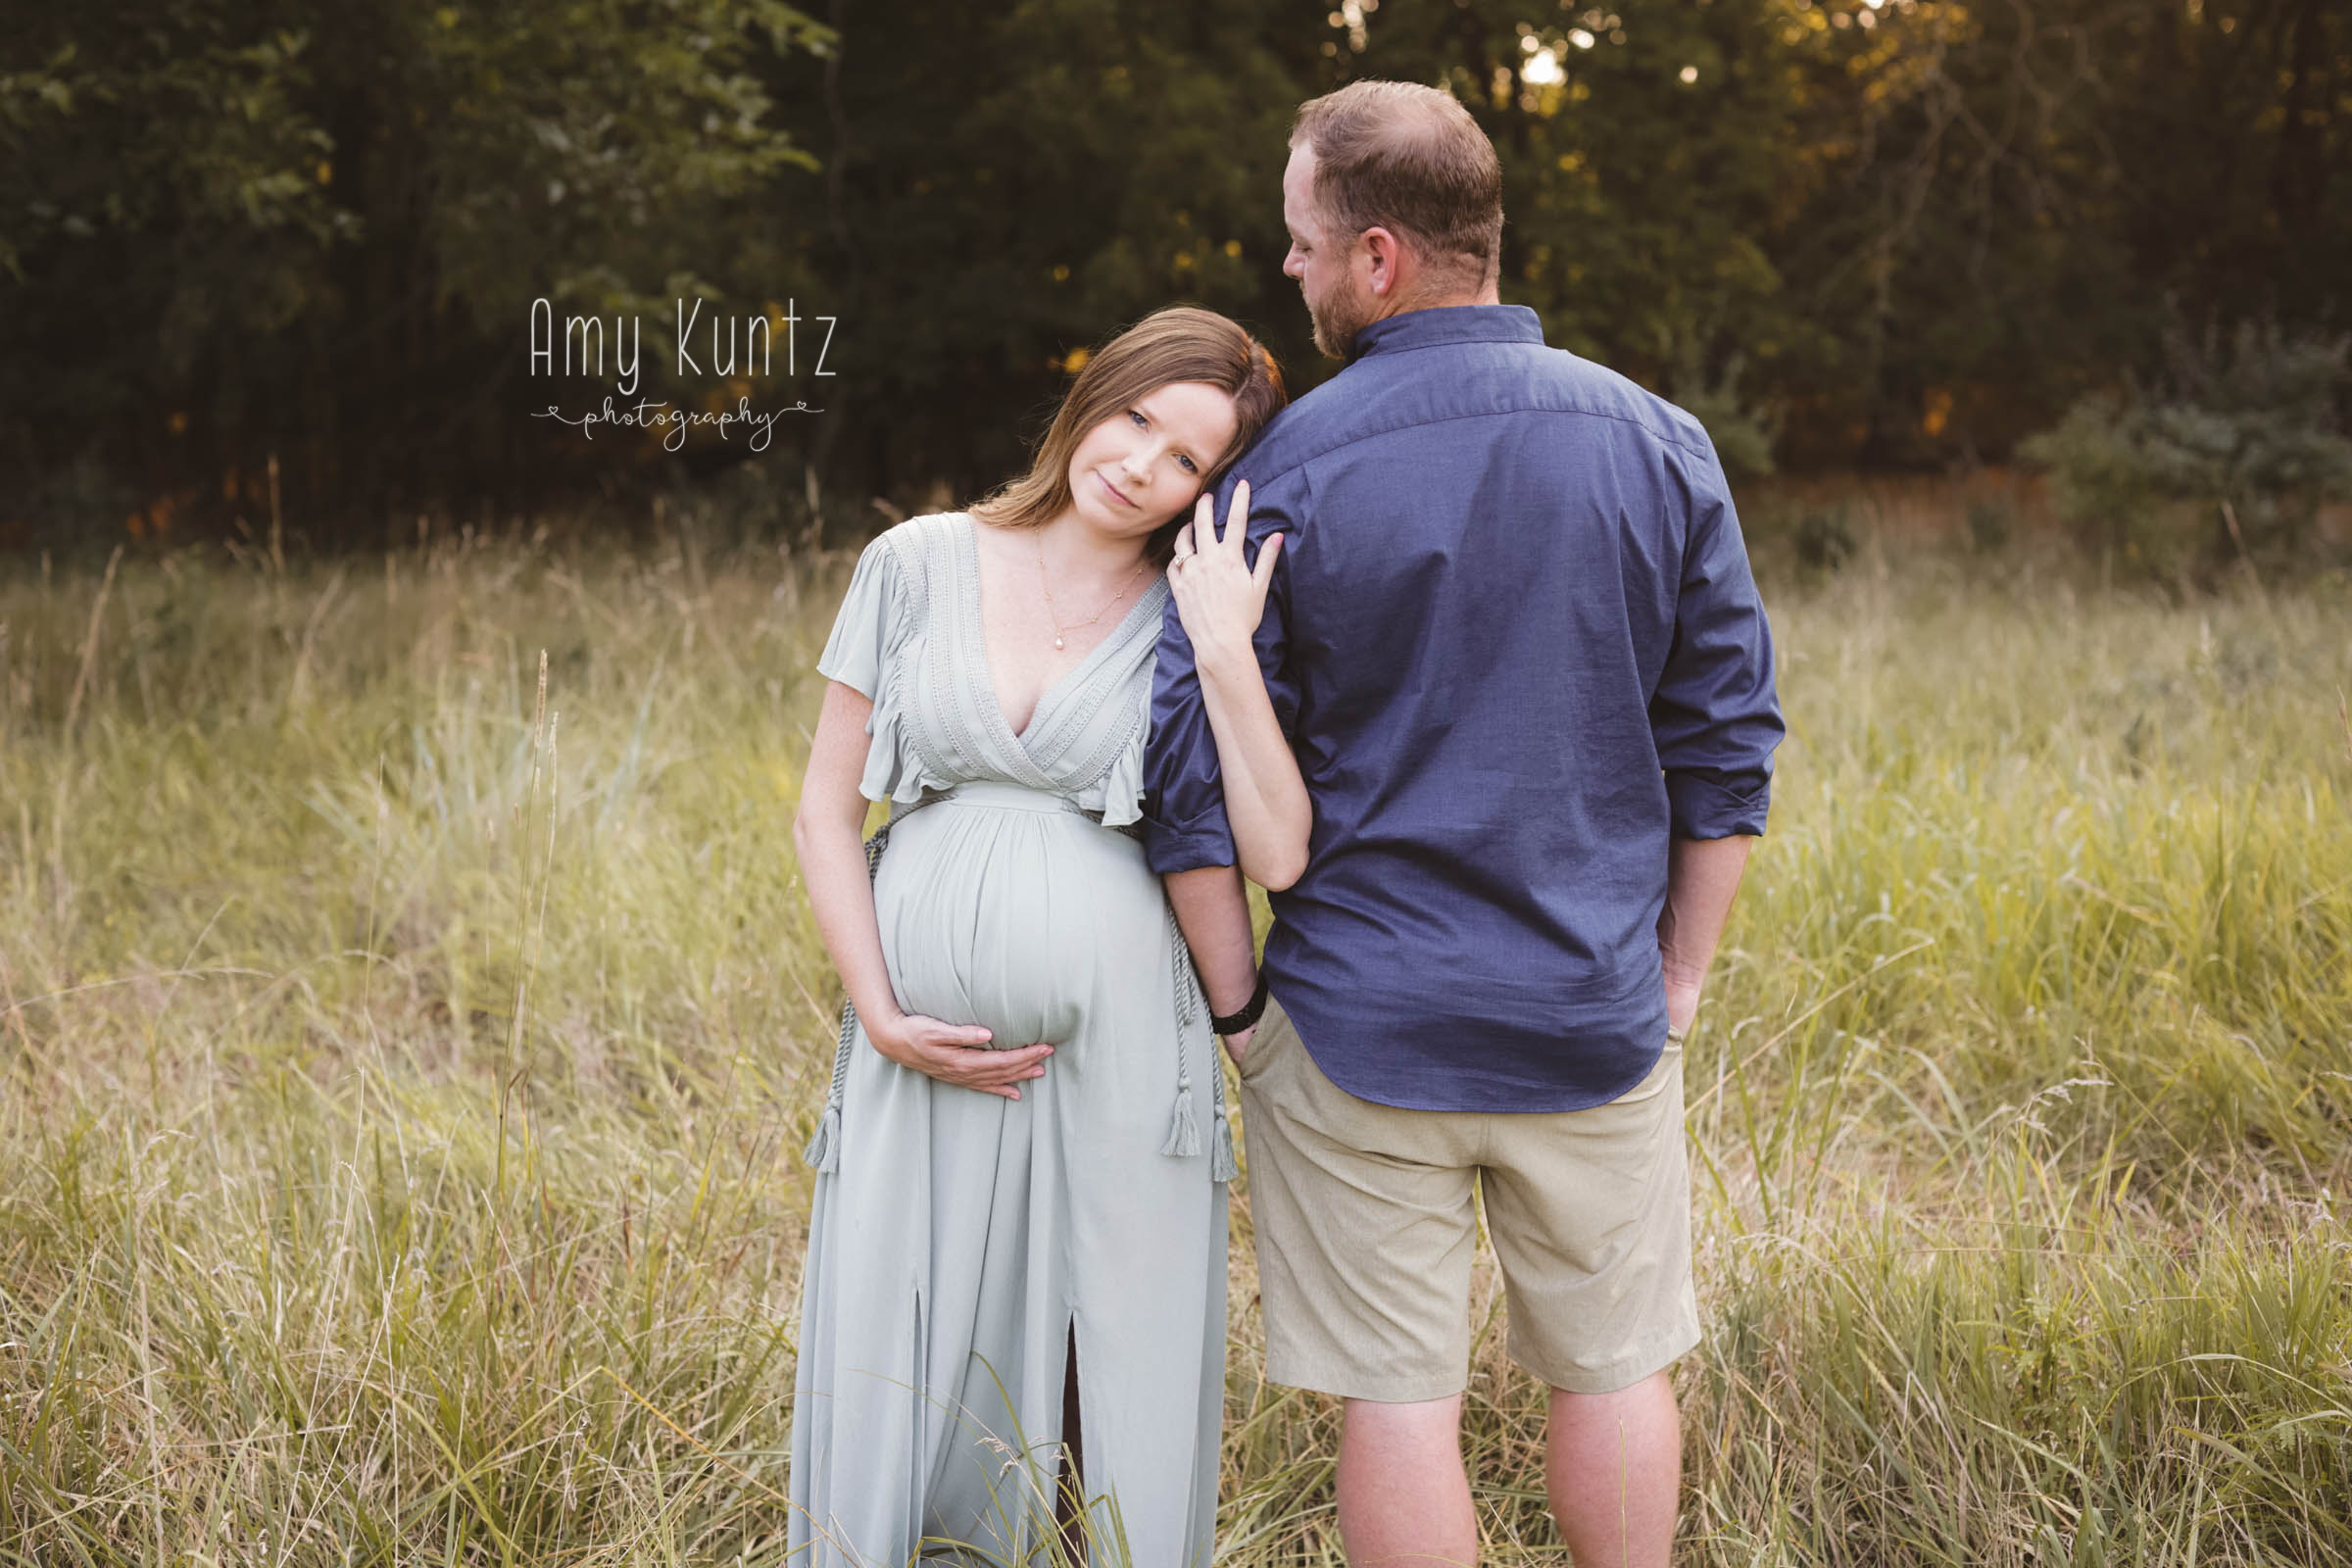 How to Do an Outdoor Maternity Photoshoot